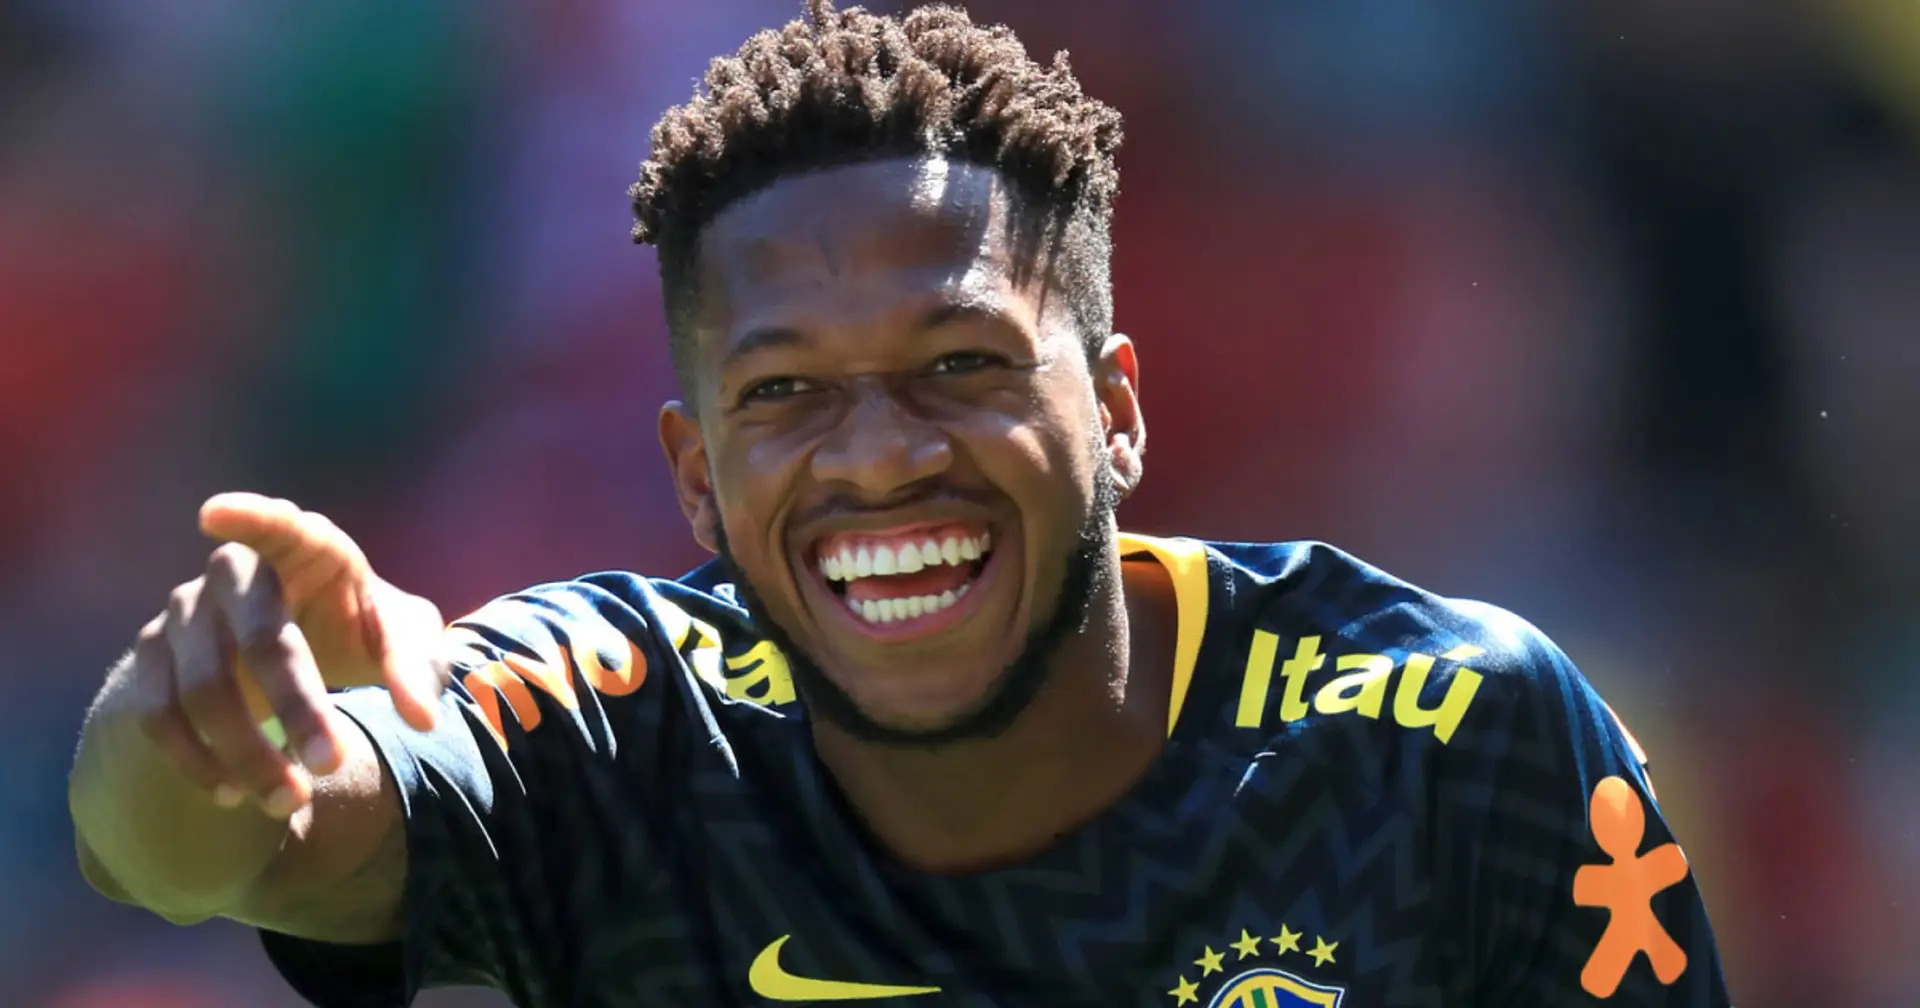 Key stats highlight Fred's role in helping Brazil qualify for Qatar World Cup